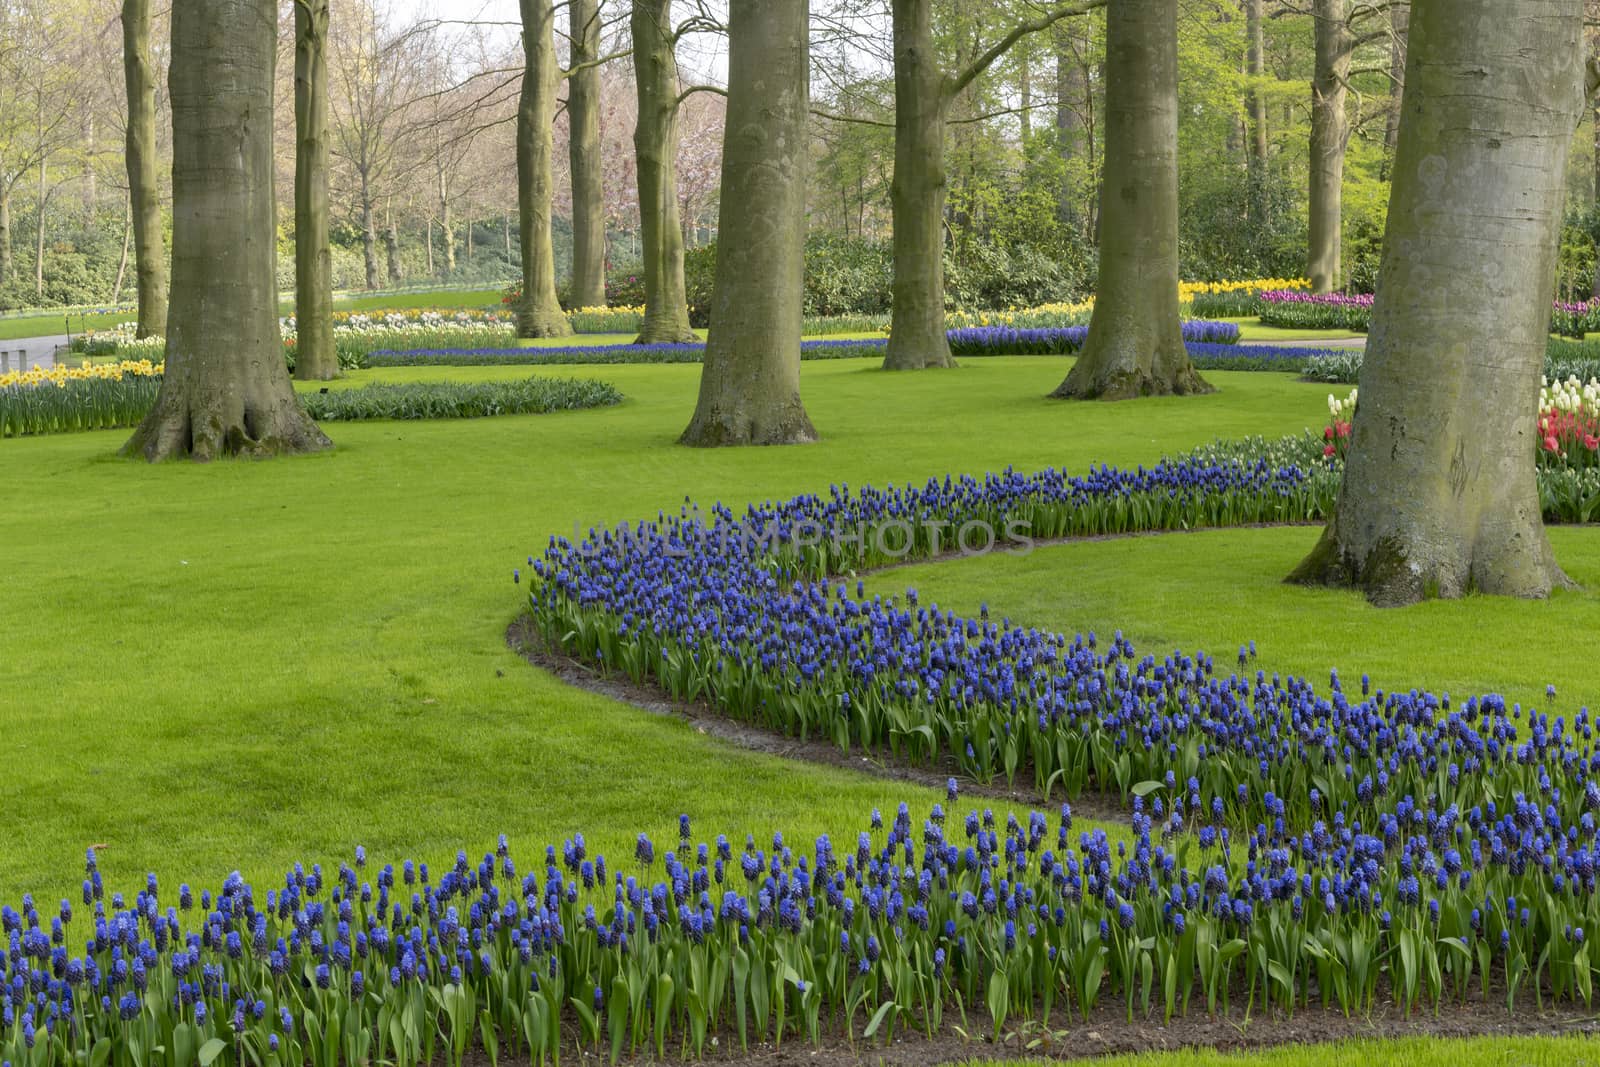 Blues flowers growing around trees and green grass in a well maintained spring garden in Netherlands by ankorlight